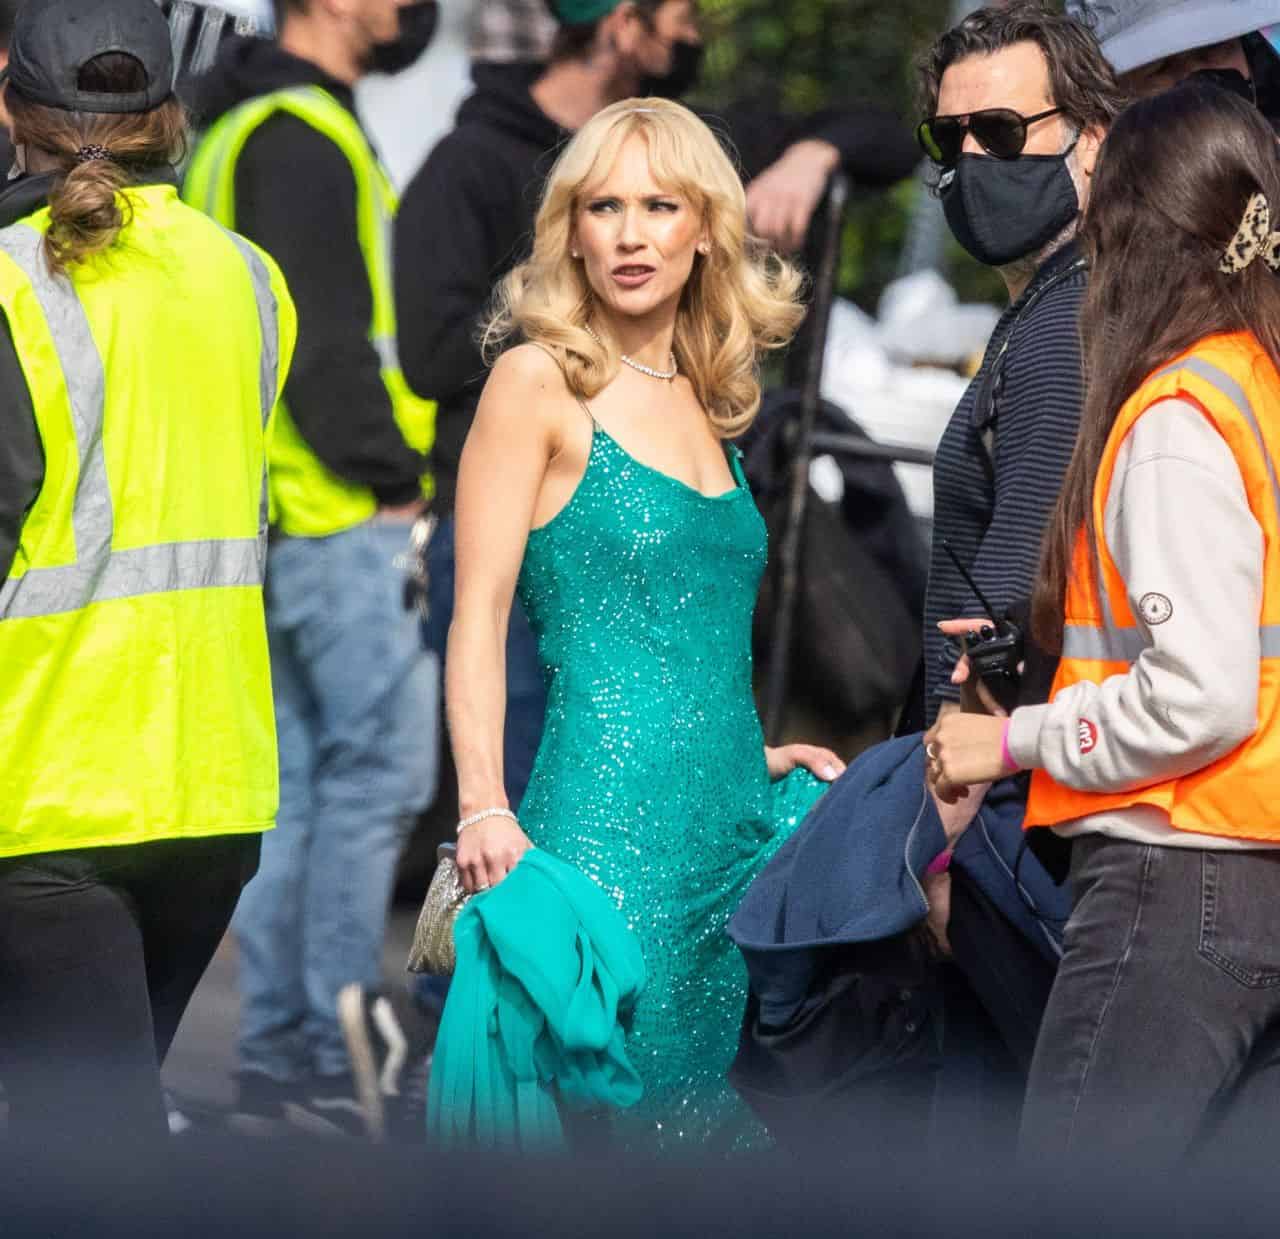 Juno Temple Stuns in Green Dress on the Set of the New Series “The Offer”